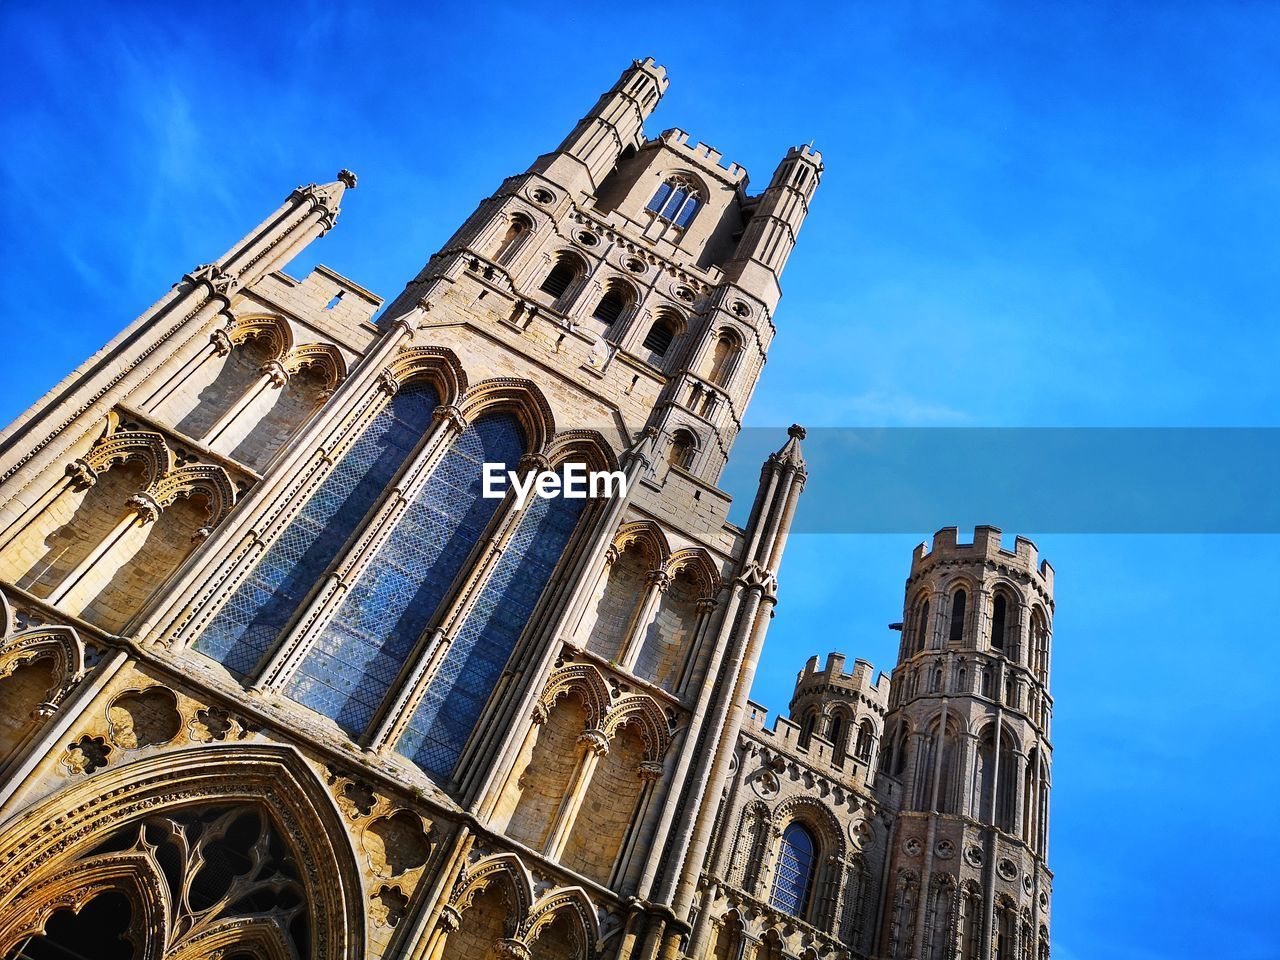 Exterior of ely cathedral with blue sky. cambridgeshire uk